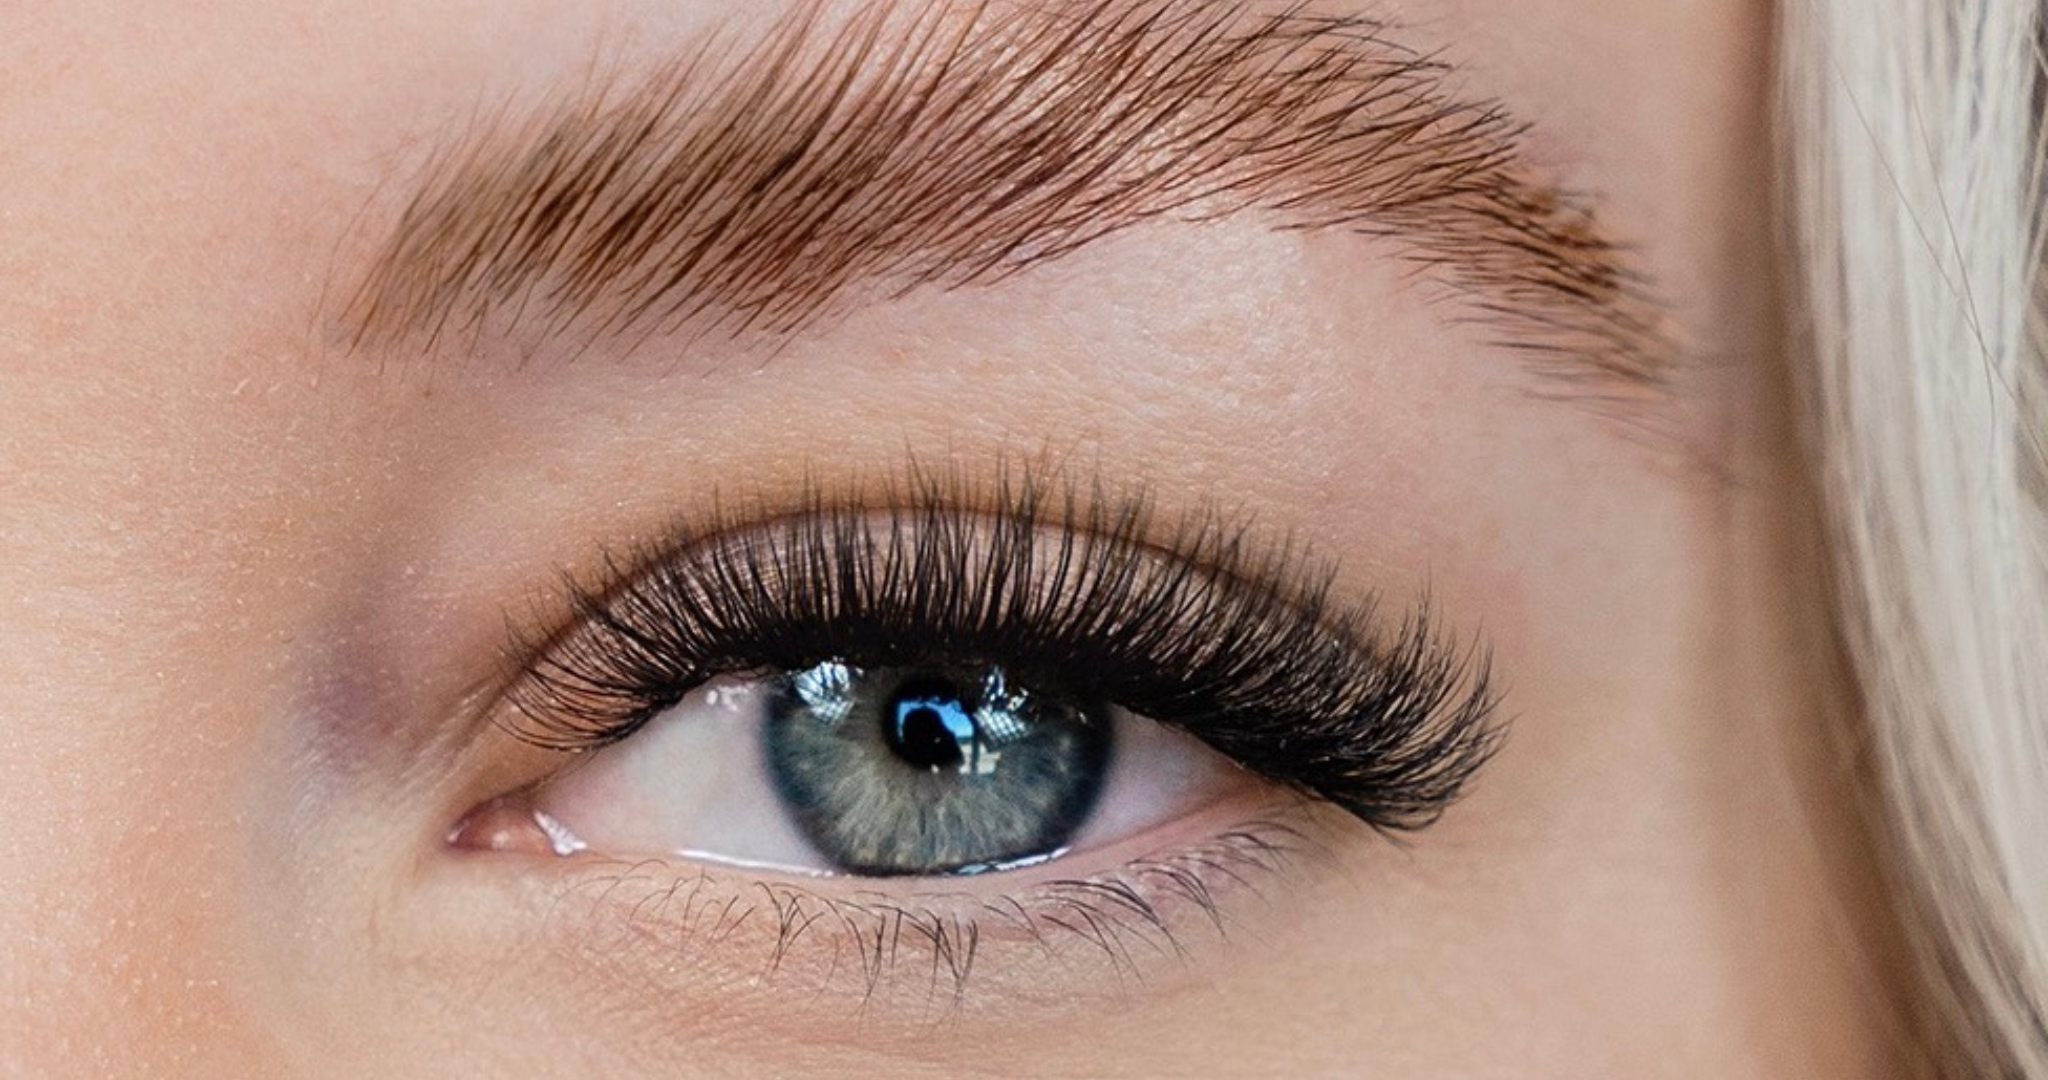 A close-up of a woman's eye with lash extensions and brow lamination